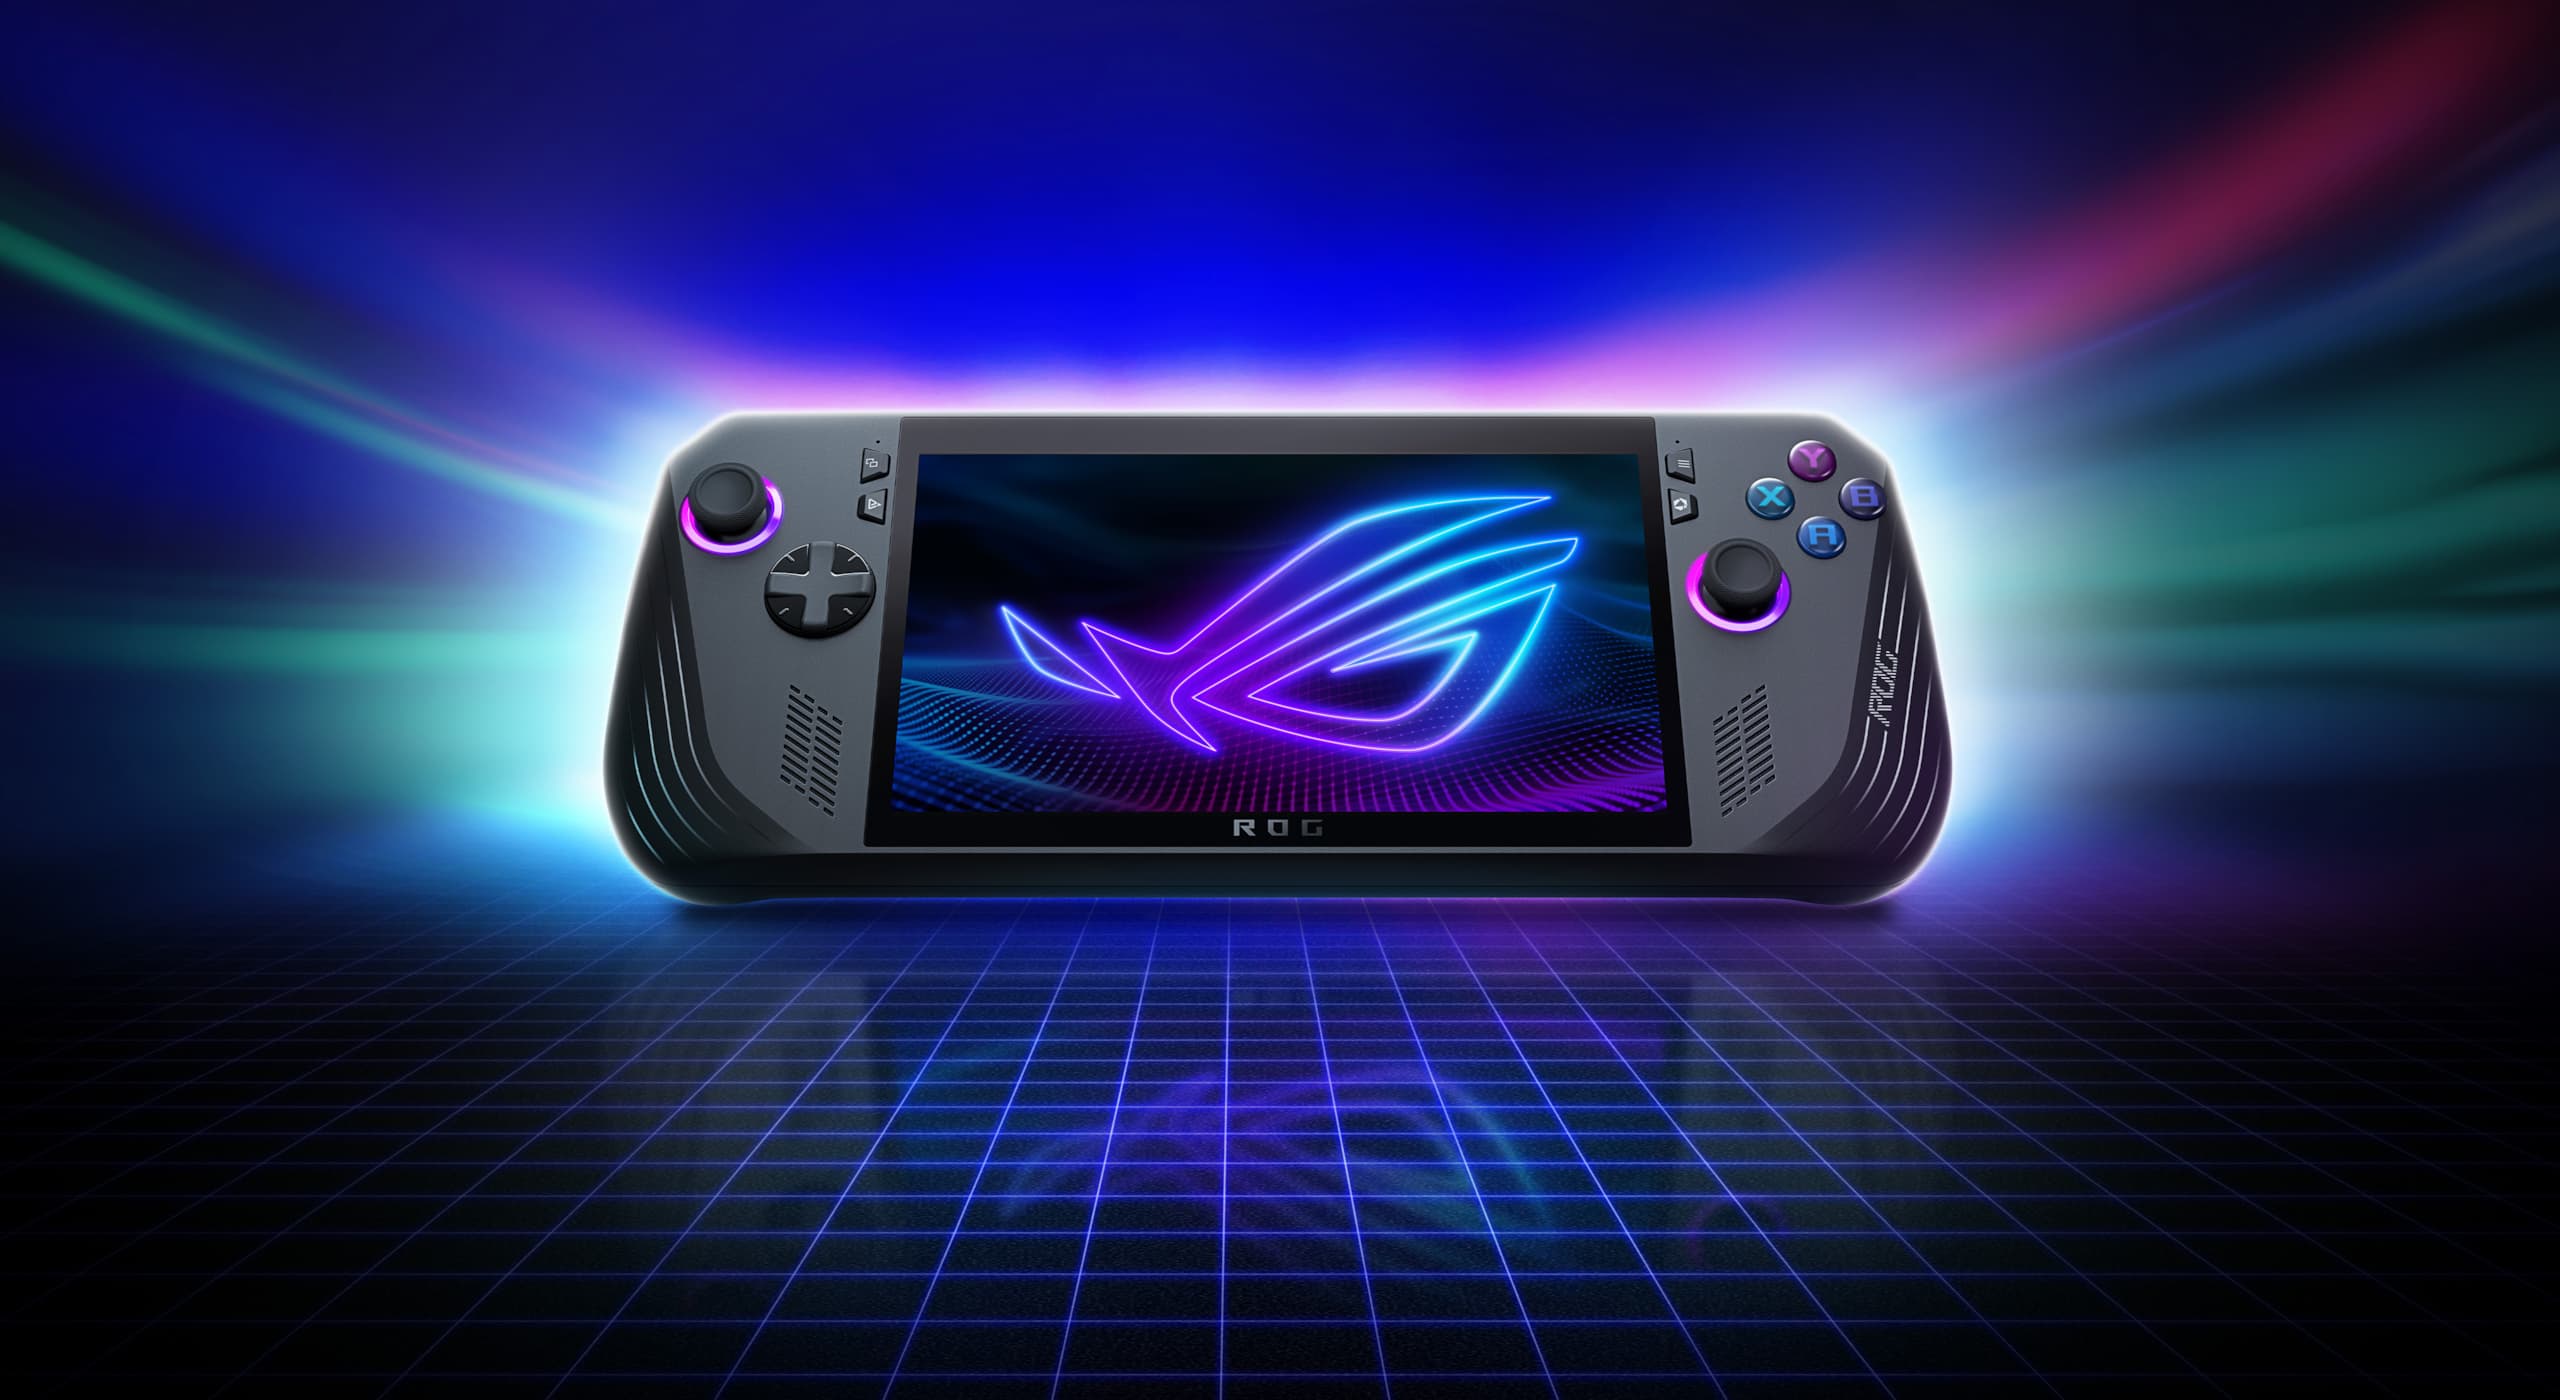 An ROG Ally X with the ROG Fearless Eye logo on screen, with text superimposed on the image saying “ROG Ally X, #playALLYourgames, LEVEL UP”.